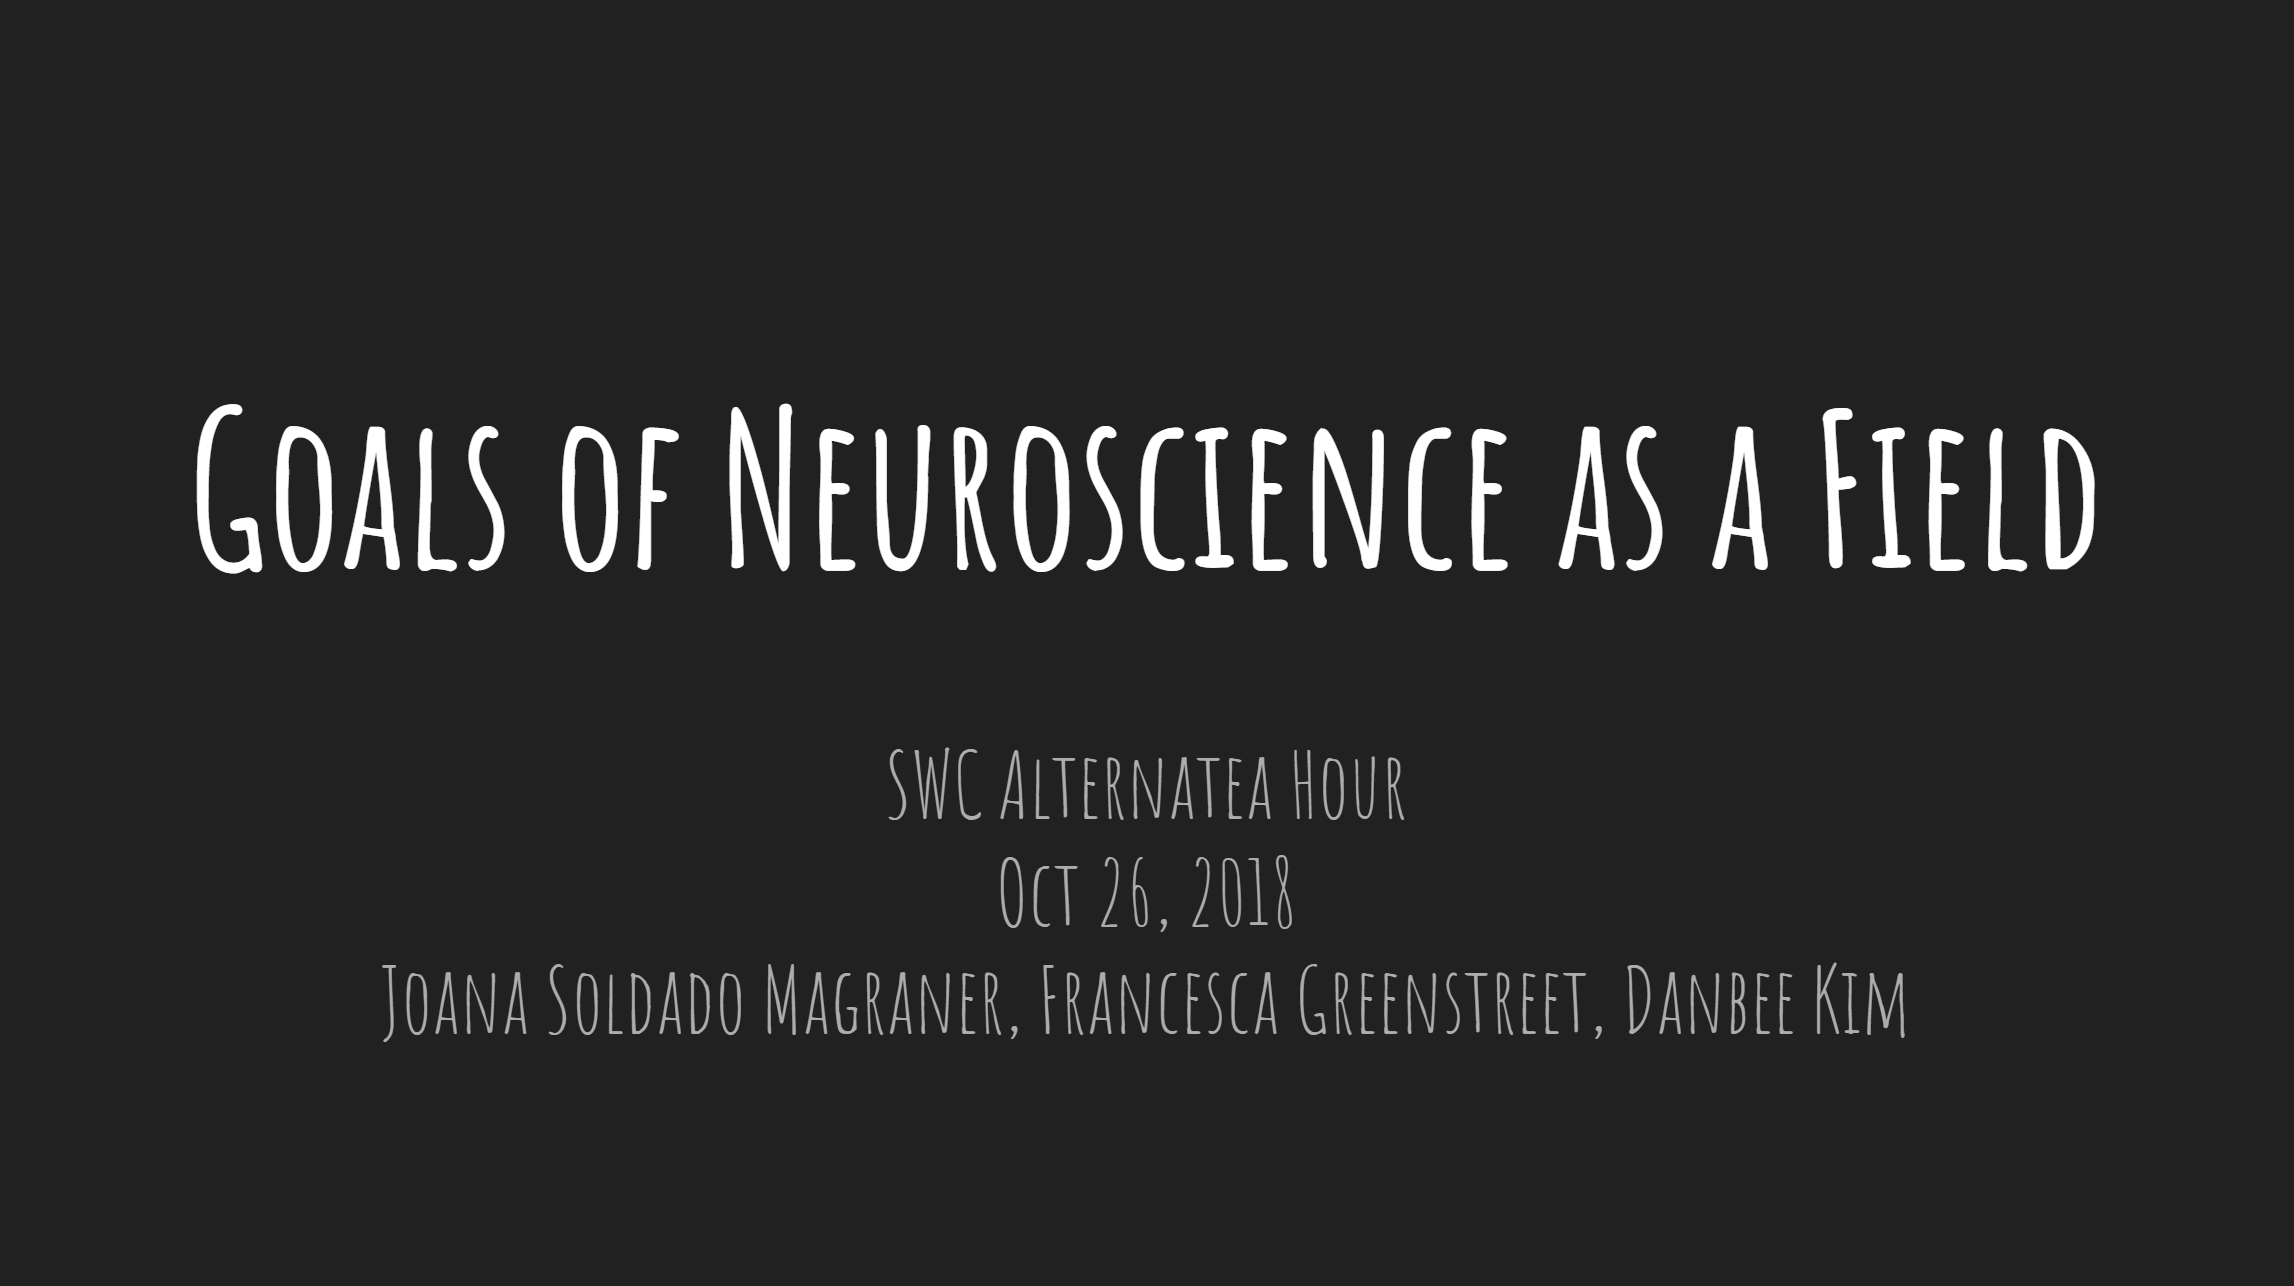 Goals of Neuroscience as a Field, a discussion with the SWC community